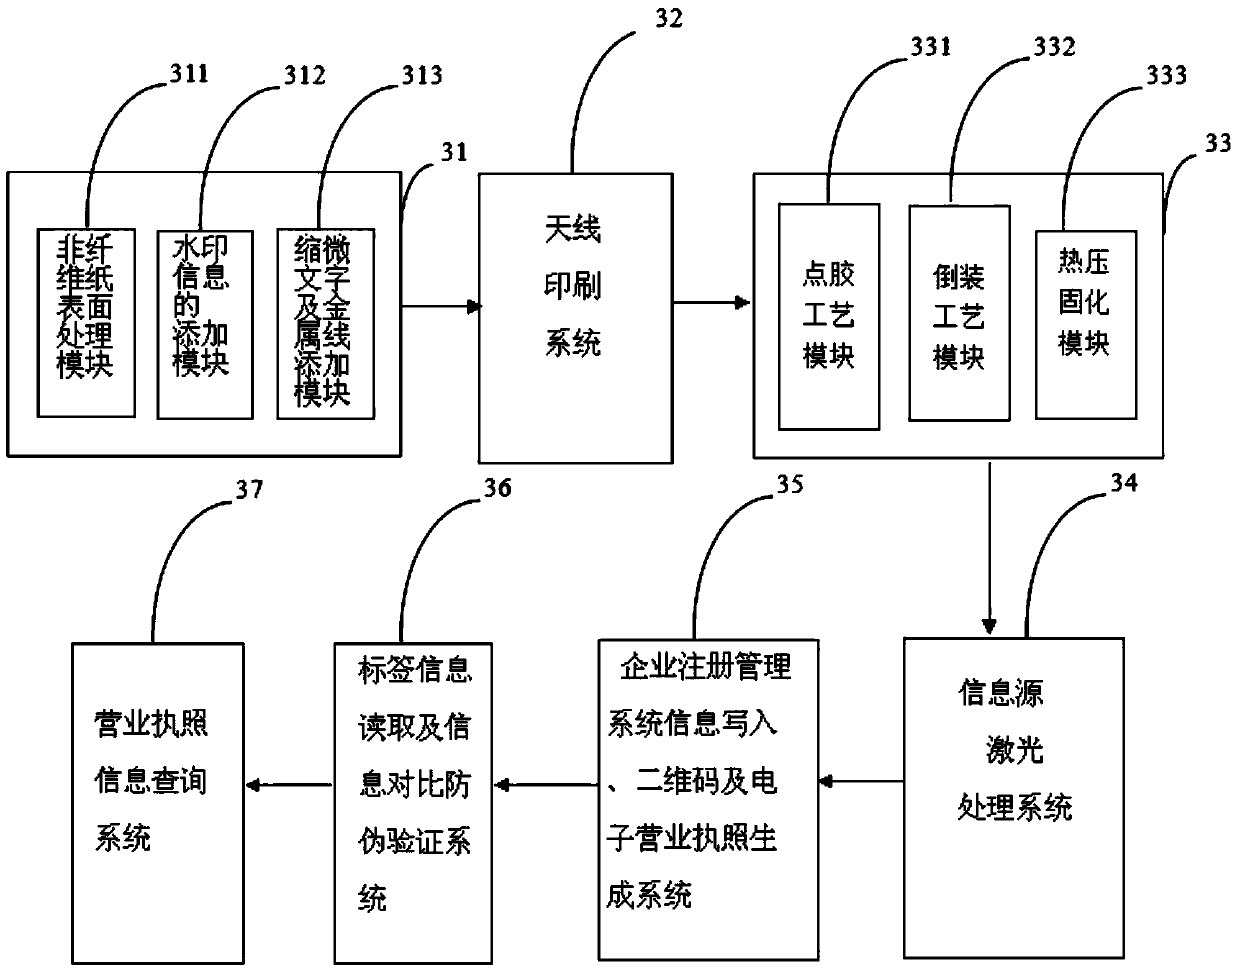 Production system of novel non-fiber material-based certificate with intelligent anti-counterfeiting function and application of production system